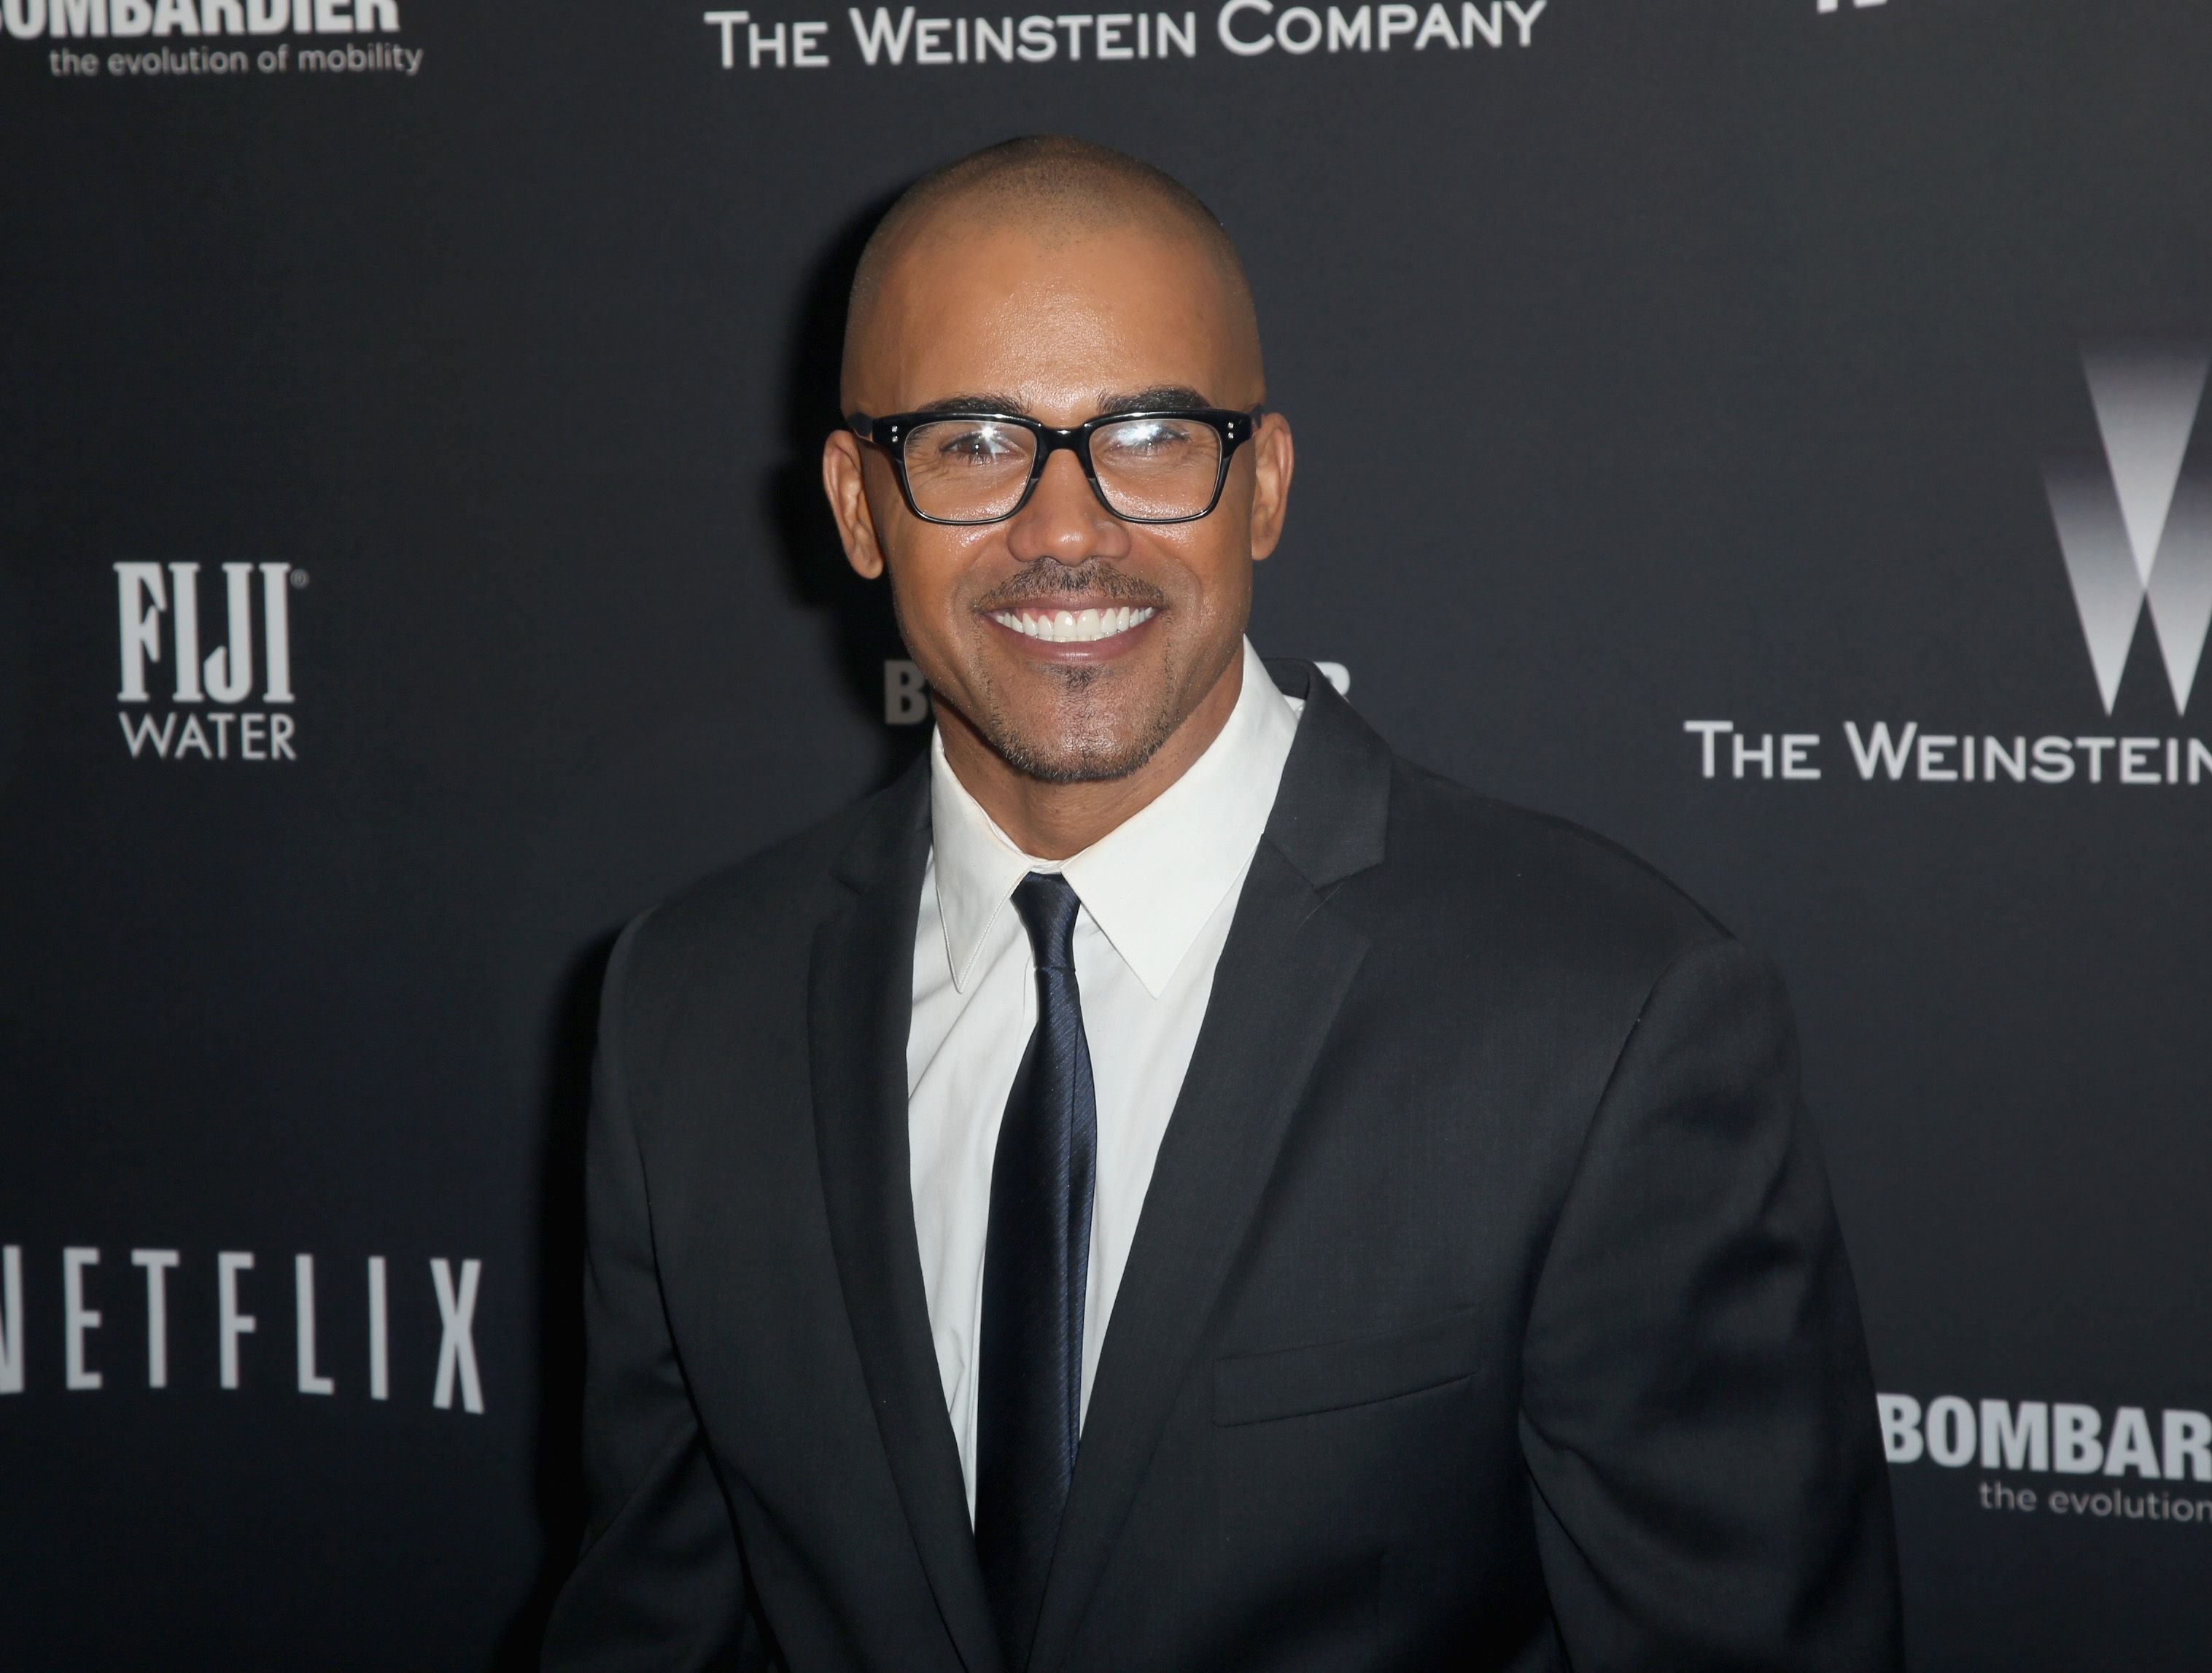 Actor Shemar Moore at The Weinstein Company & Netflix's 2014 Golden Globes After Party at The Beverly Hilton Hotel on January 12, 2014 in Beverly Hills, California. | Photo: Getty Images